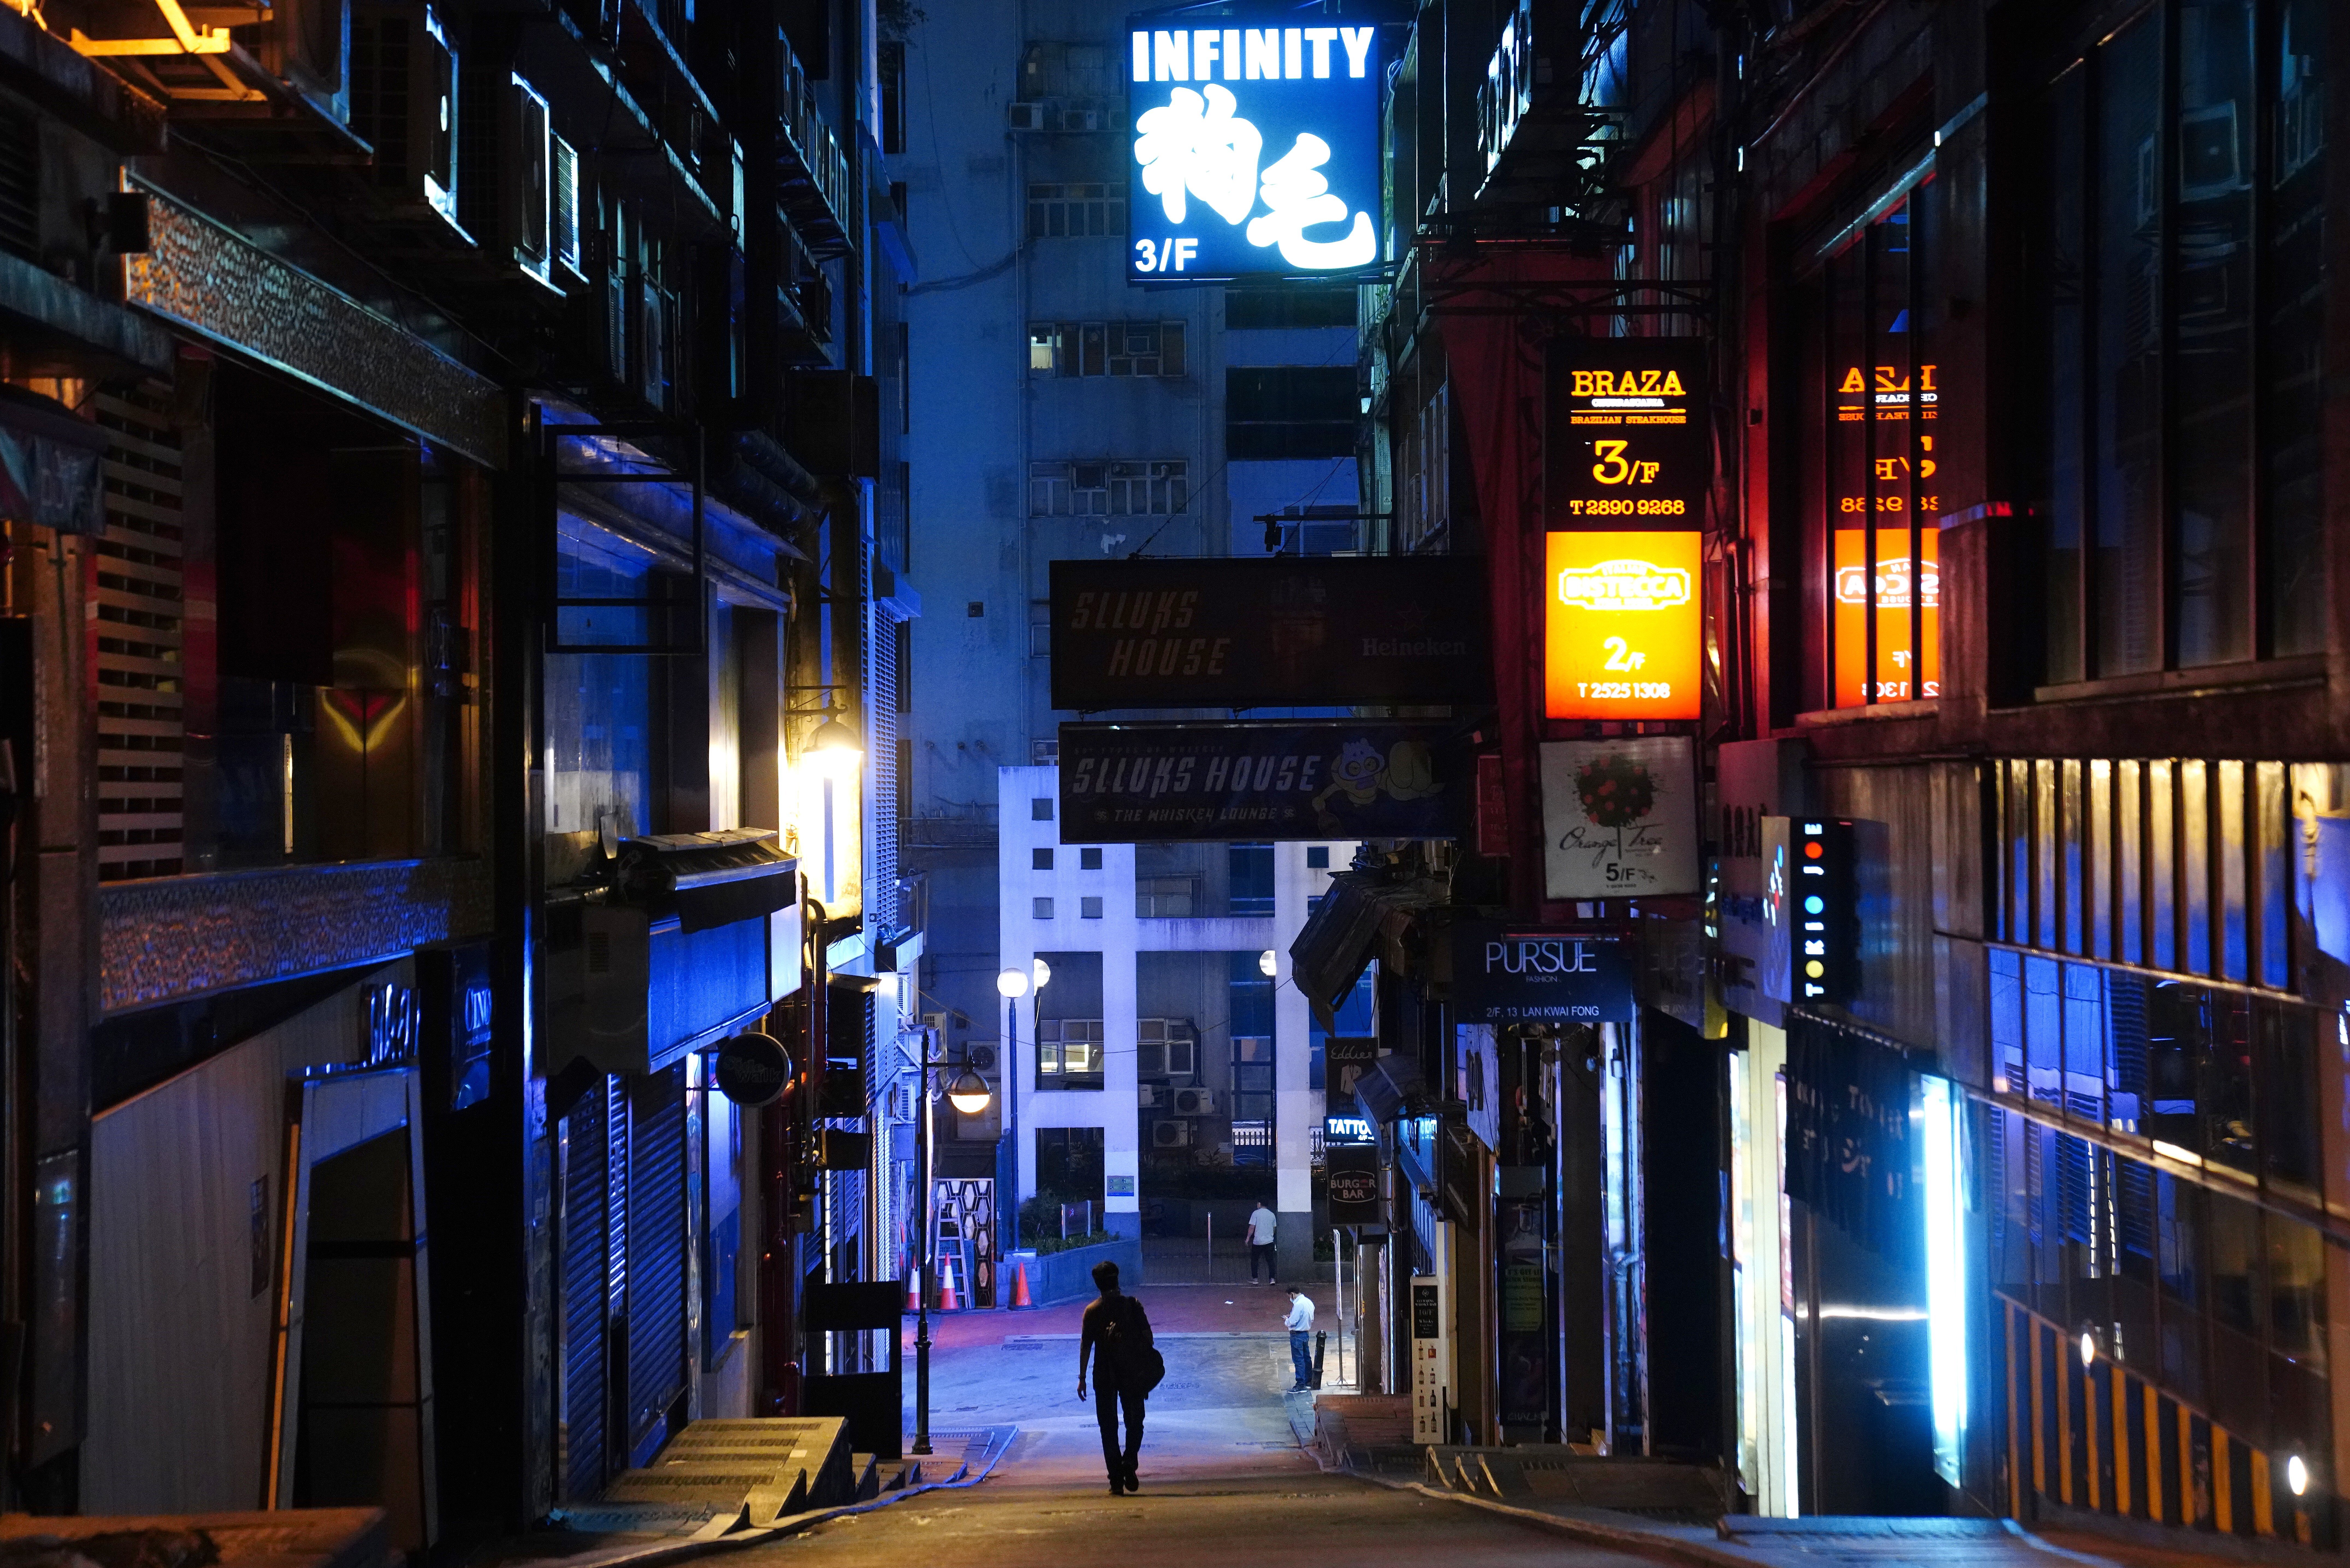 A man walks down a deserted street in the usually bustling nightlife district of Lan Kwai Fong in Central on March 27. The government has ordered a two-week shutdown of pubs and bars to contain the spread of Covid-19. Photo: Sam Tsang